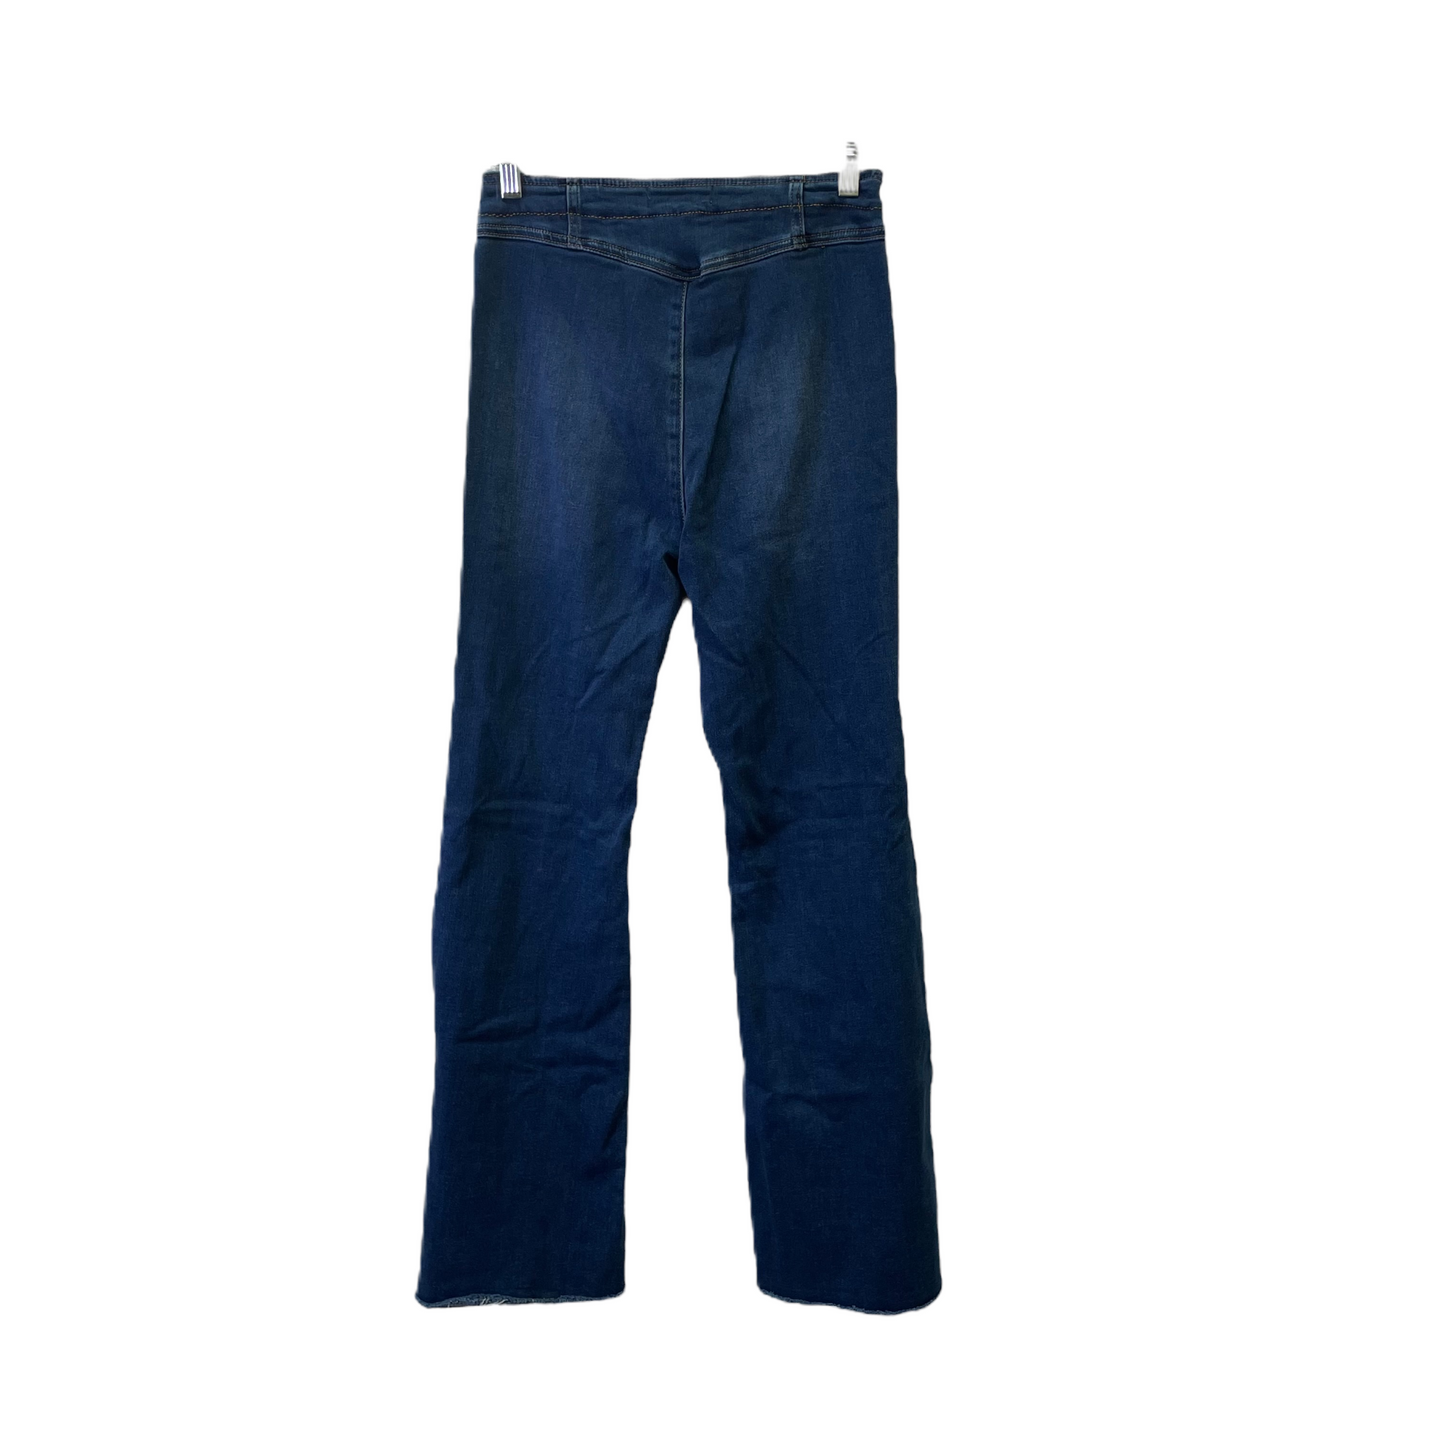 Blue Denim Jeans Flared By Vibrant, Size: 8